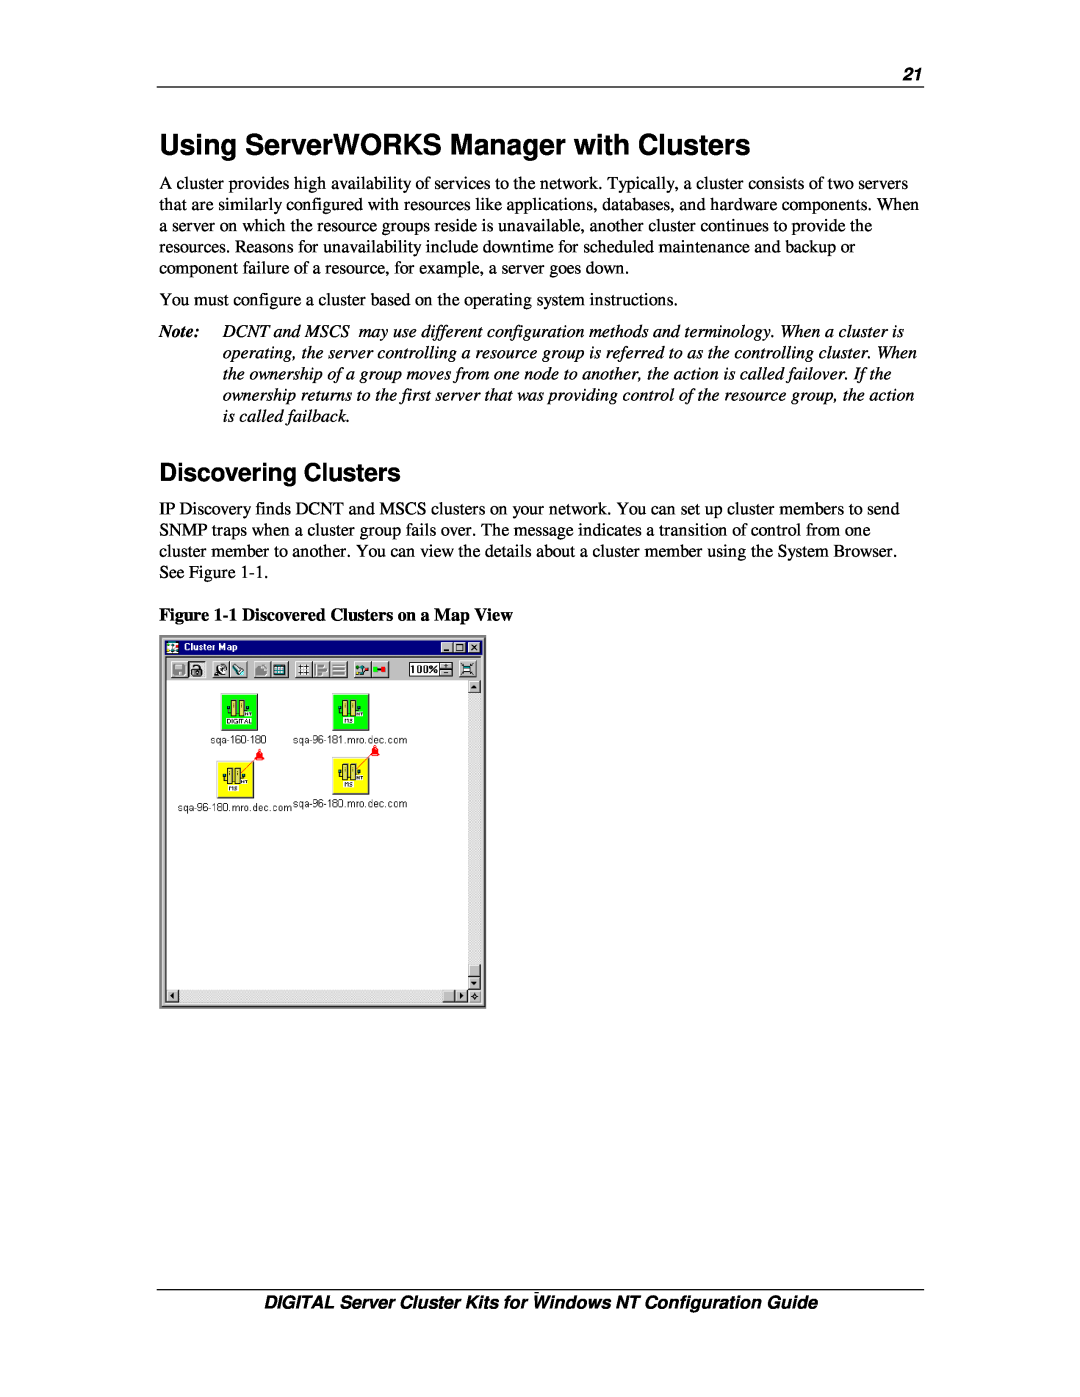 Compaq DIGITAL Server Cluster Kits for Windows NT manual Using ServerWORKS Manager with Clusters, Discovering Clusters 